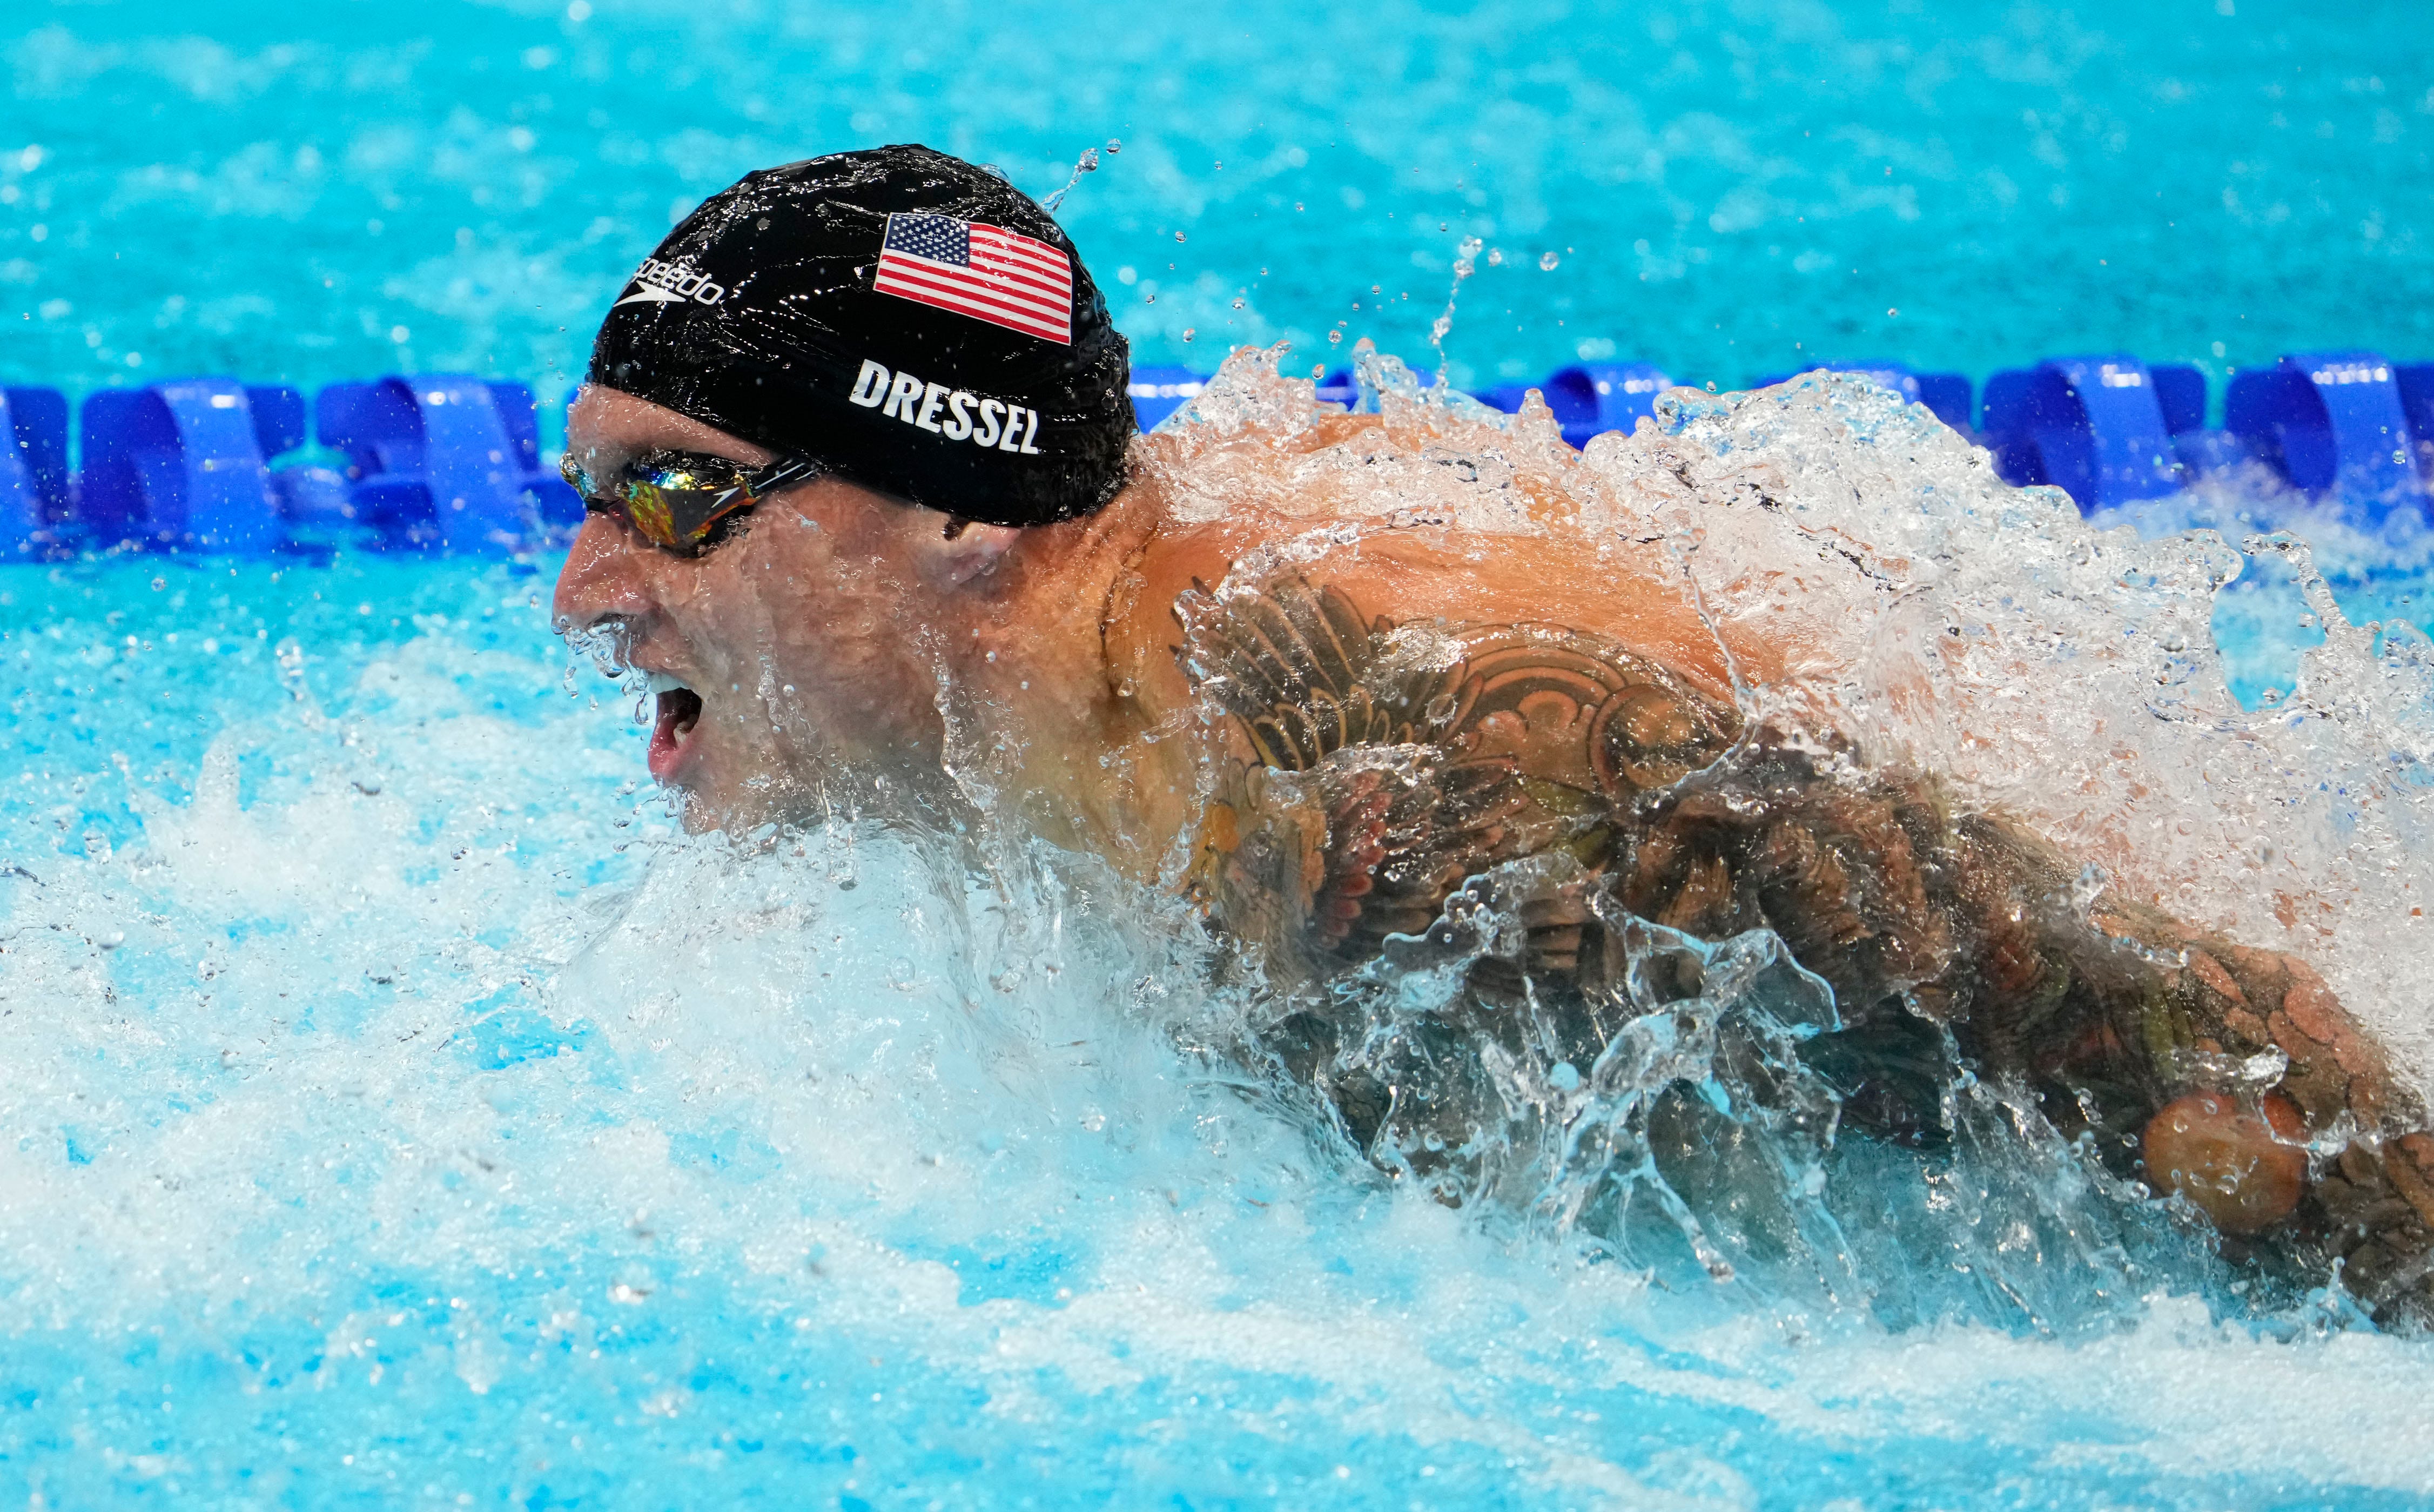 August 1, 2021: Caeleb Dressel (USA) in the men's 4x100m medley final during the Tokyo 2020 Olympic Summer Games at Tokyo Aquatics Centre.